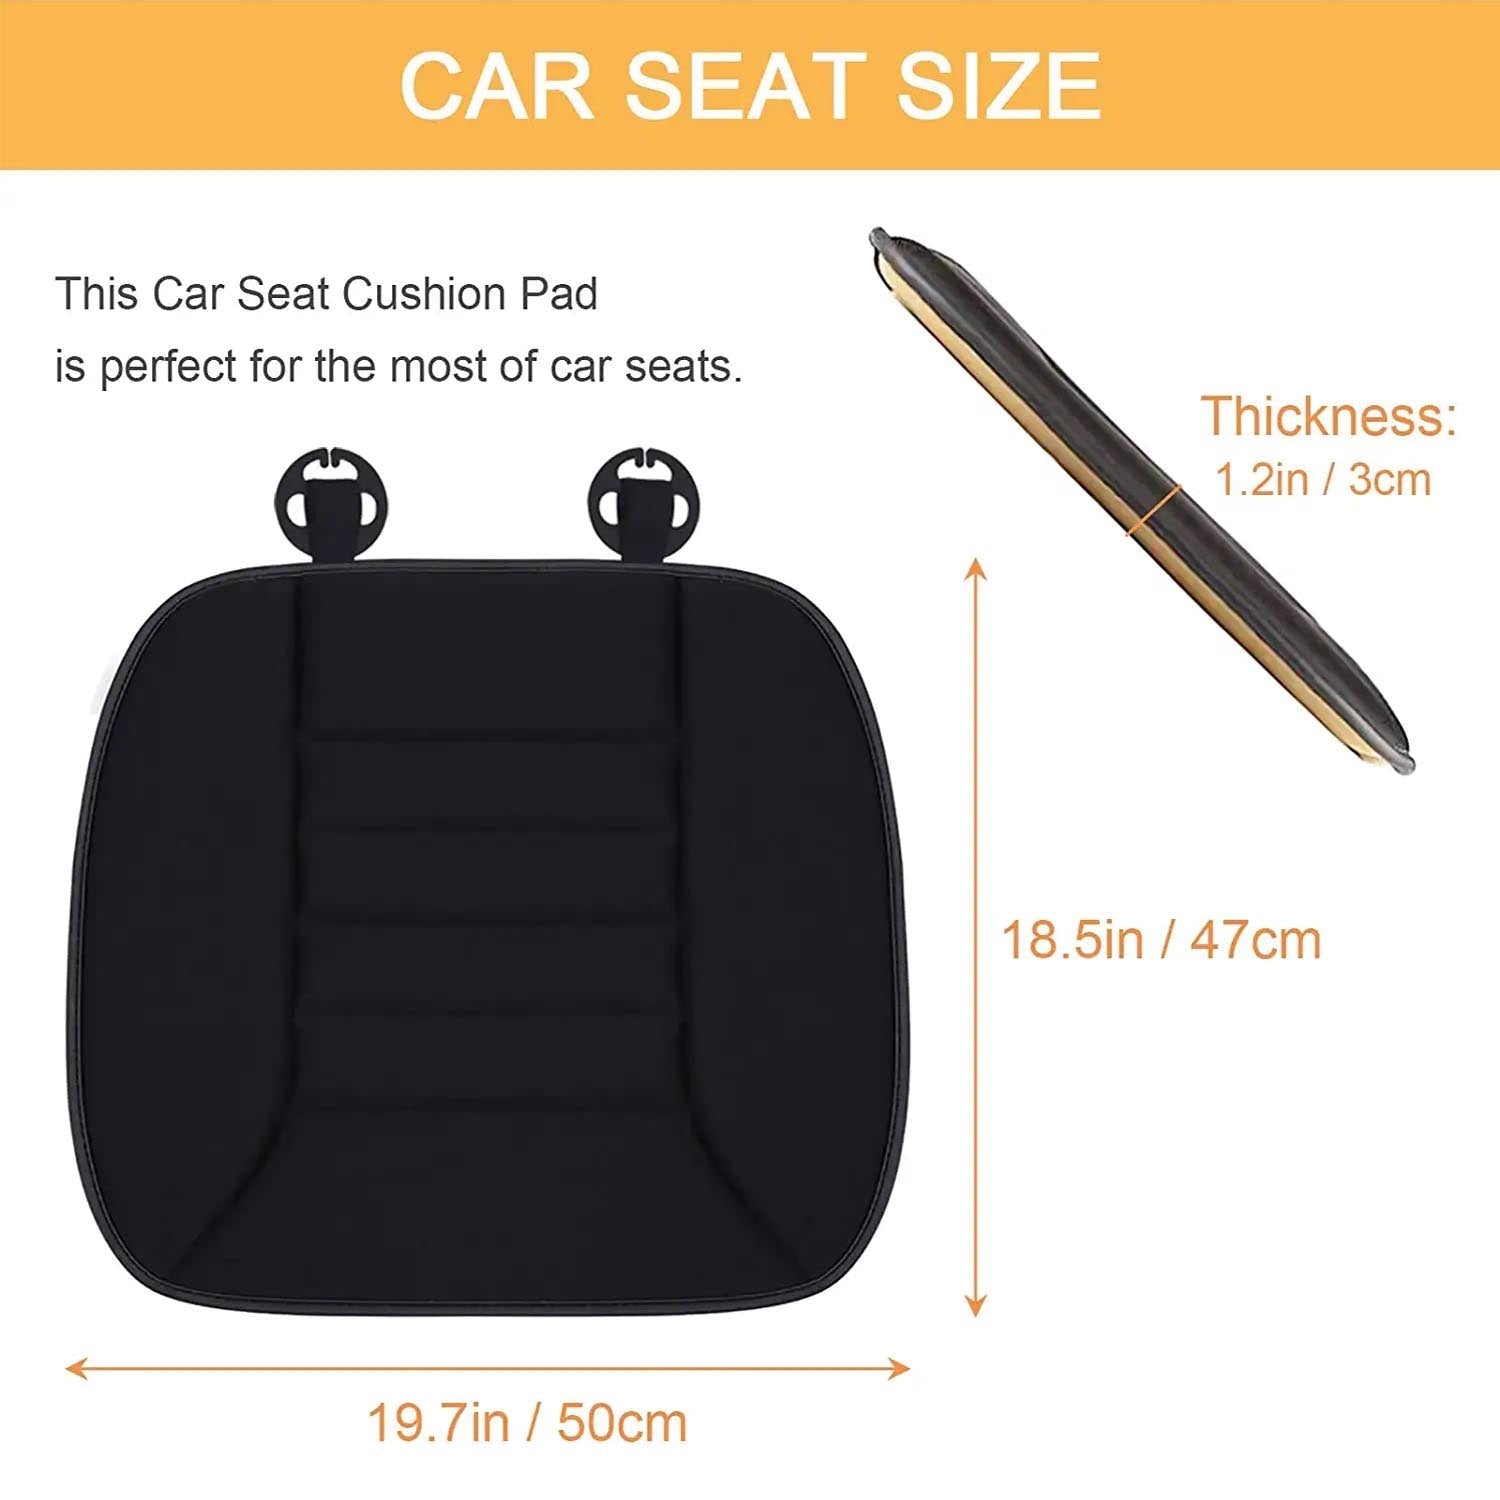 Delicate Leather Car Seat Cushion with 1.2inch Comfort Memory Foam, Custom Logo For Your Cars, Seat Cushion for Car and Office Chair FJ19989 - Delicate Leather